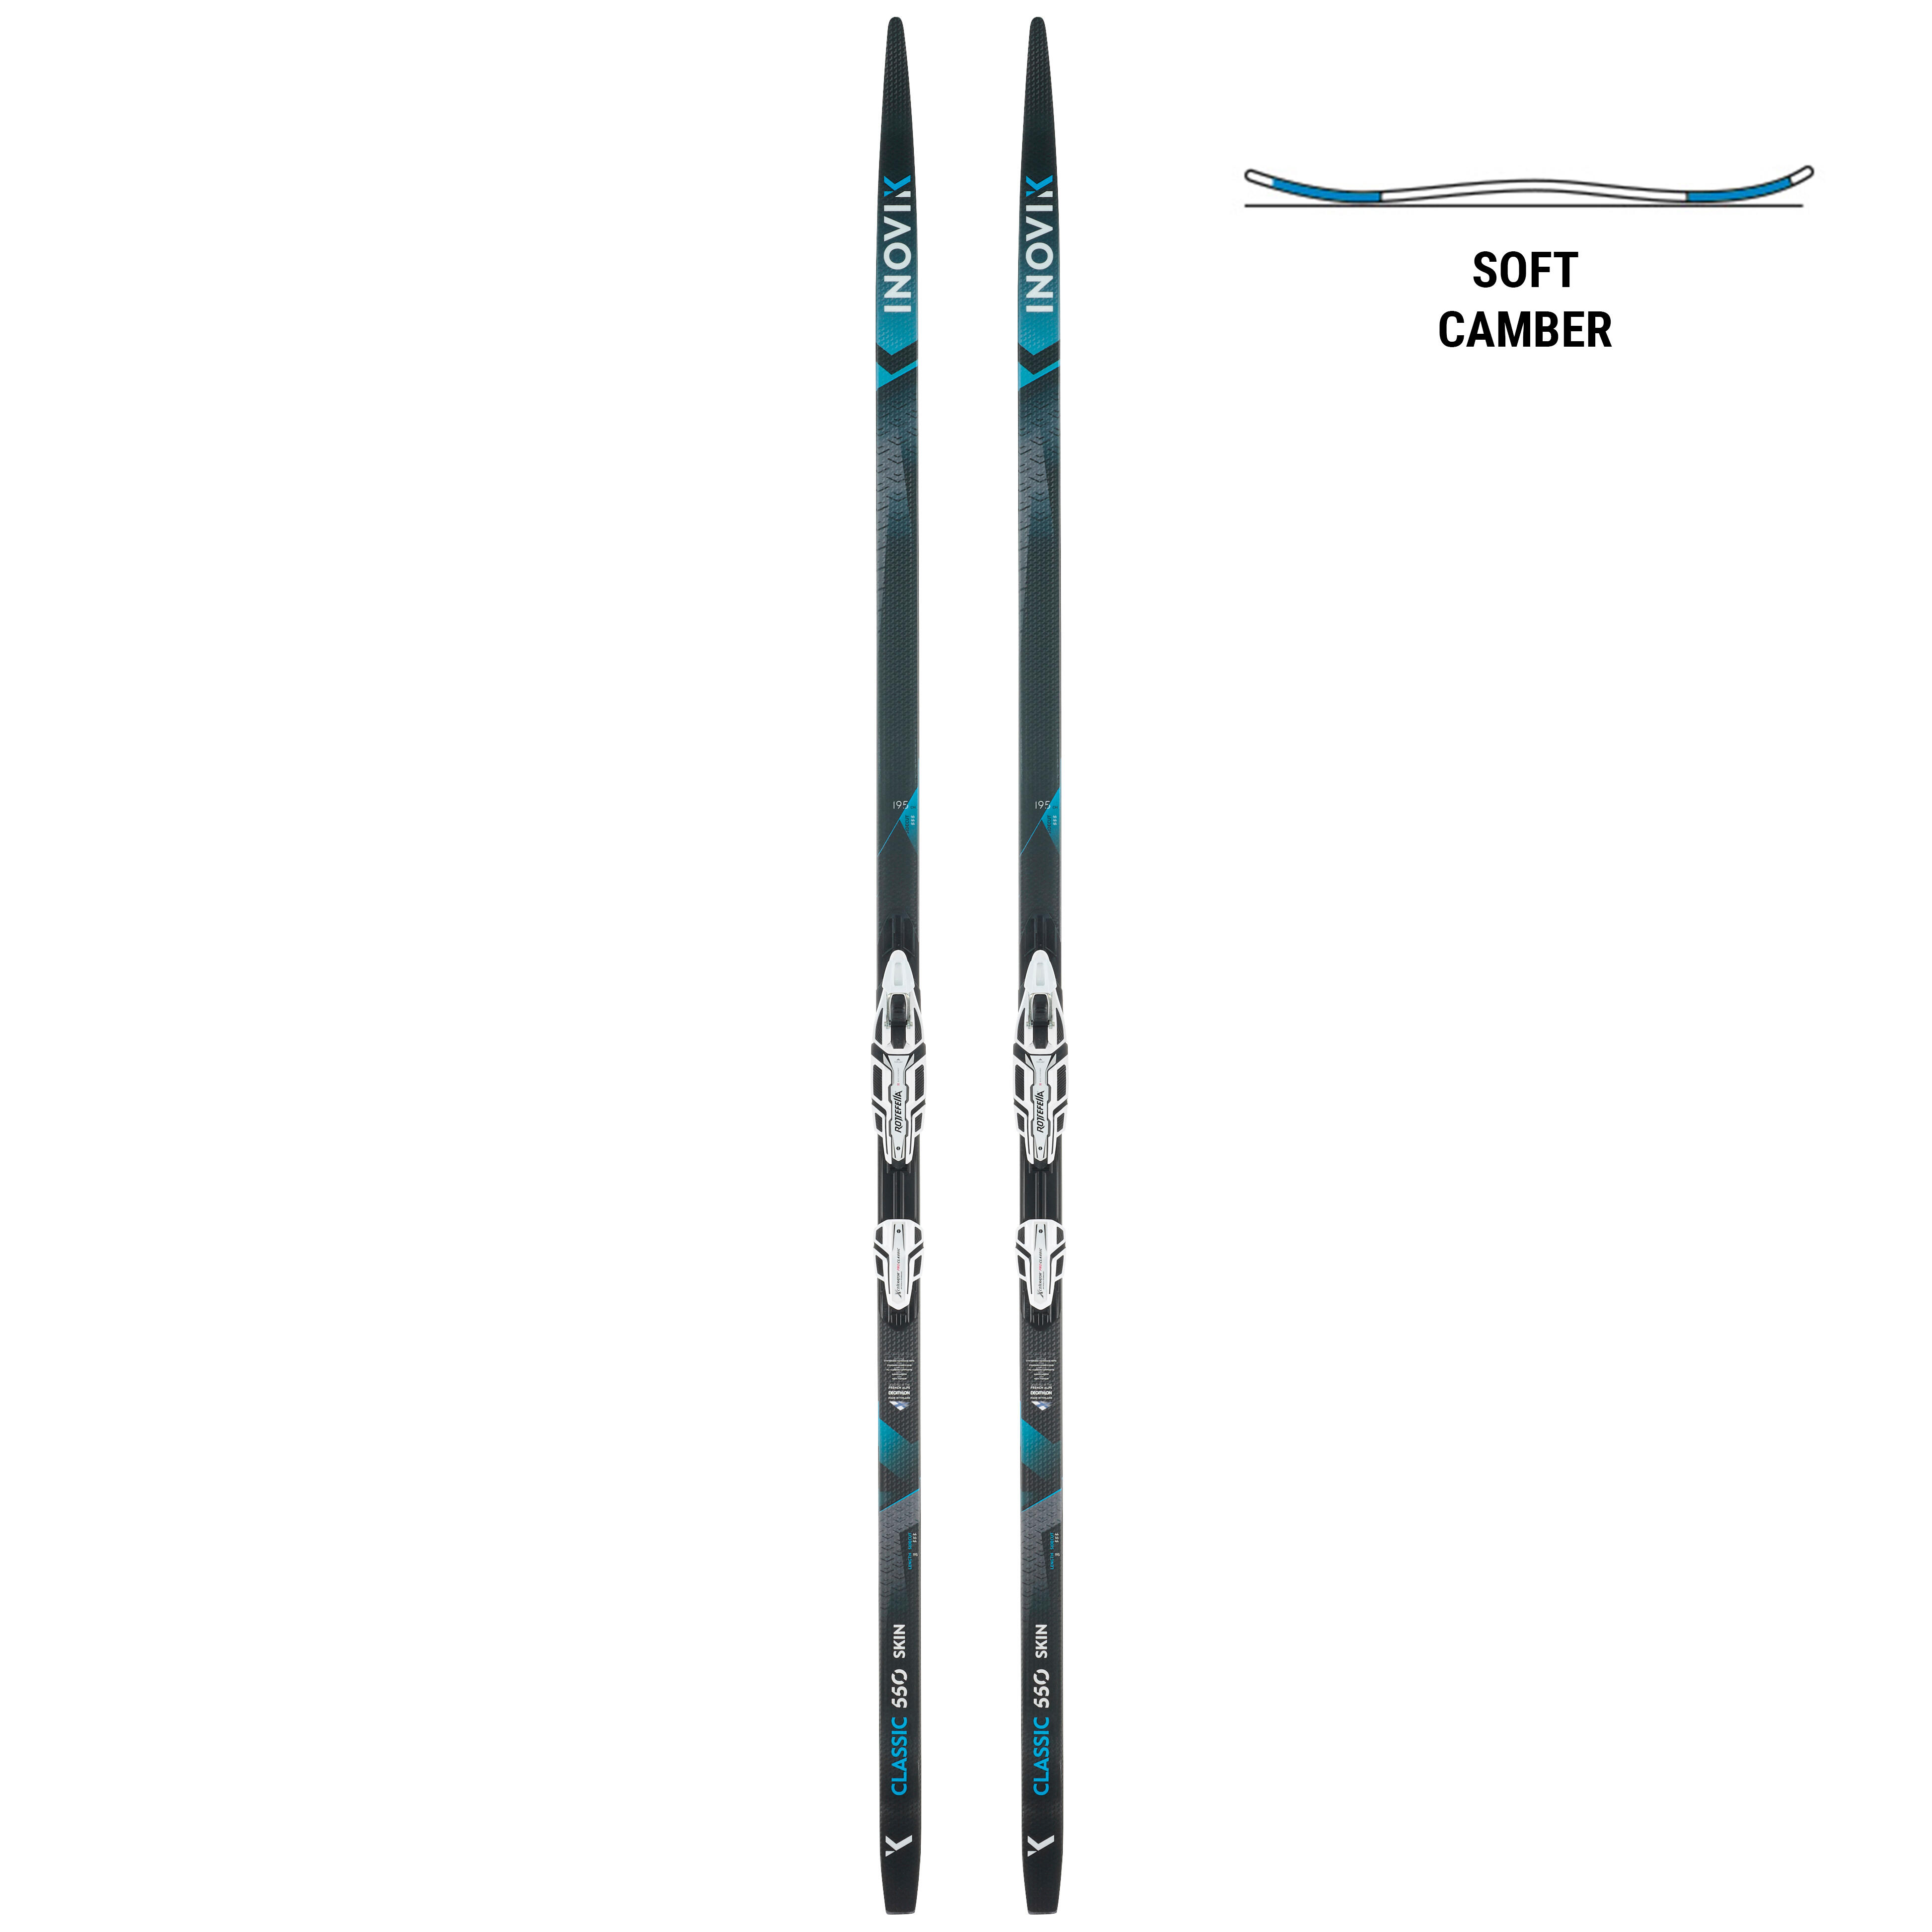 Classic cross country skis 550 with 